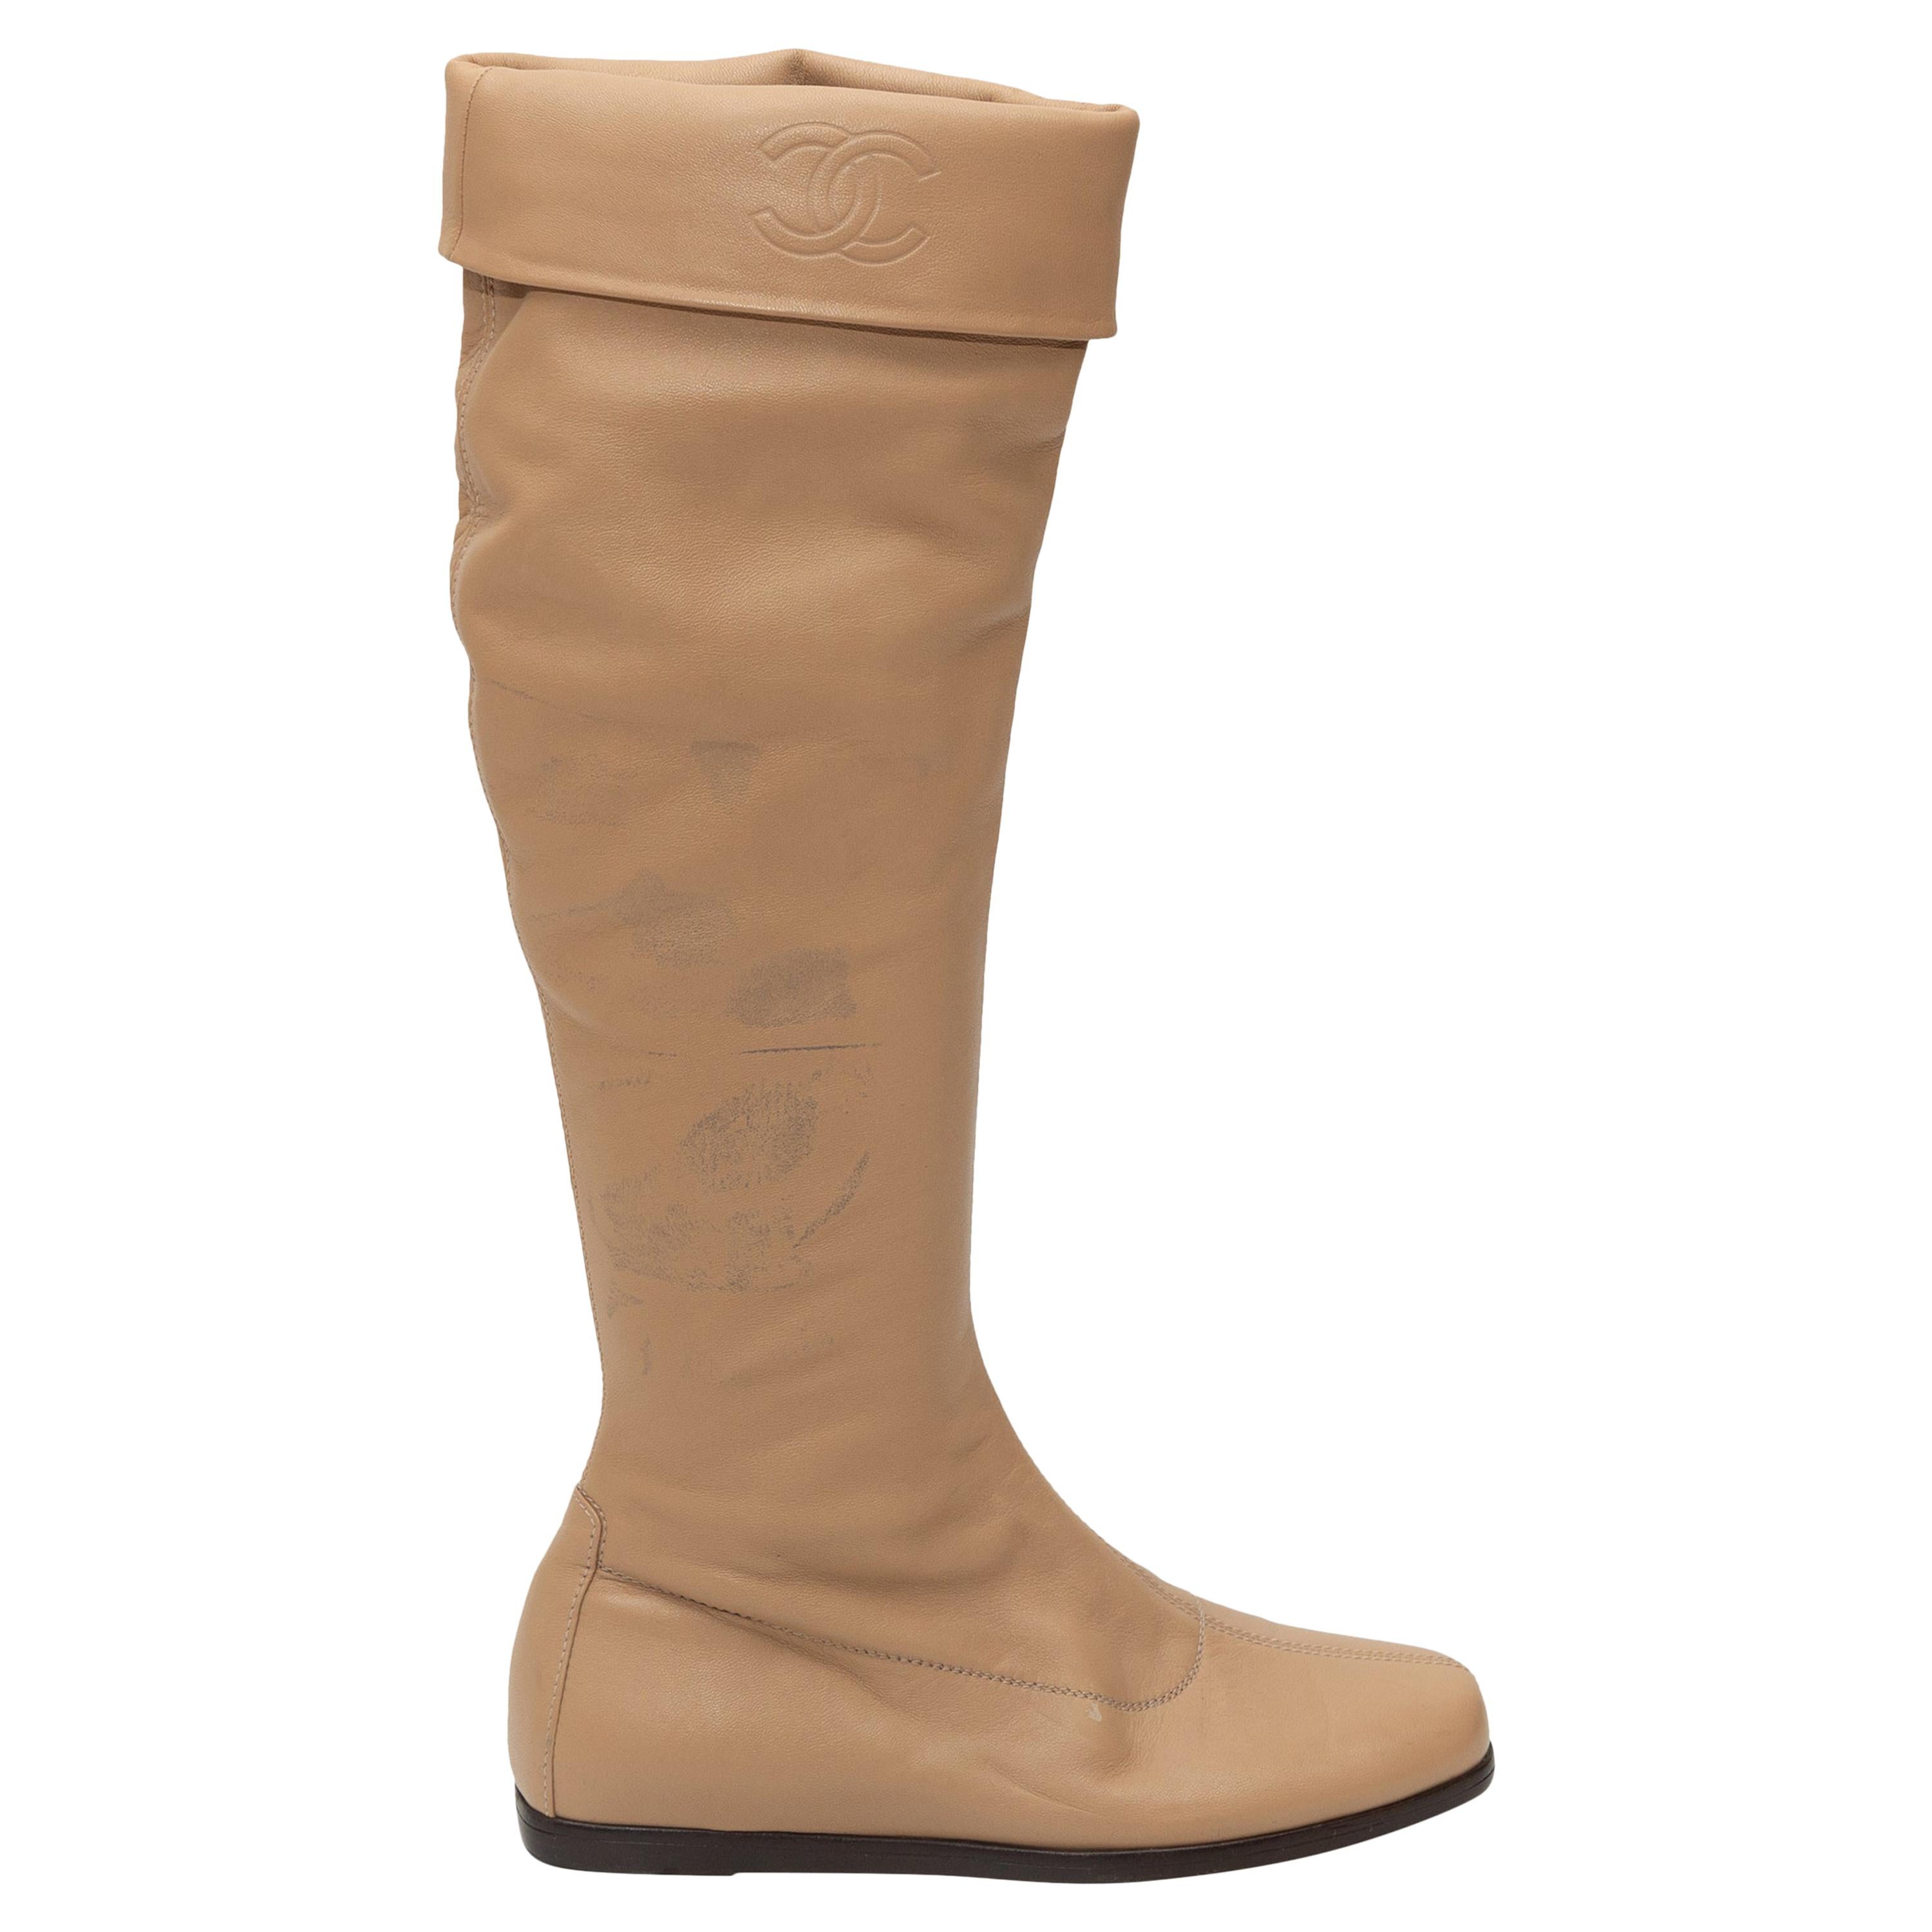 Chanel Tan Knee-High Leather Boots